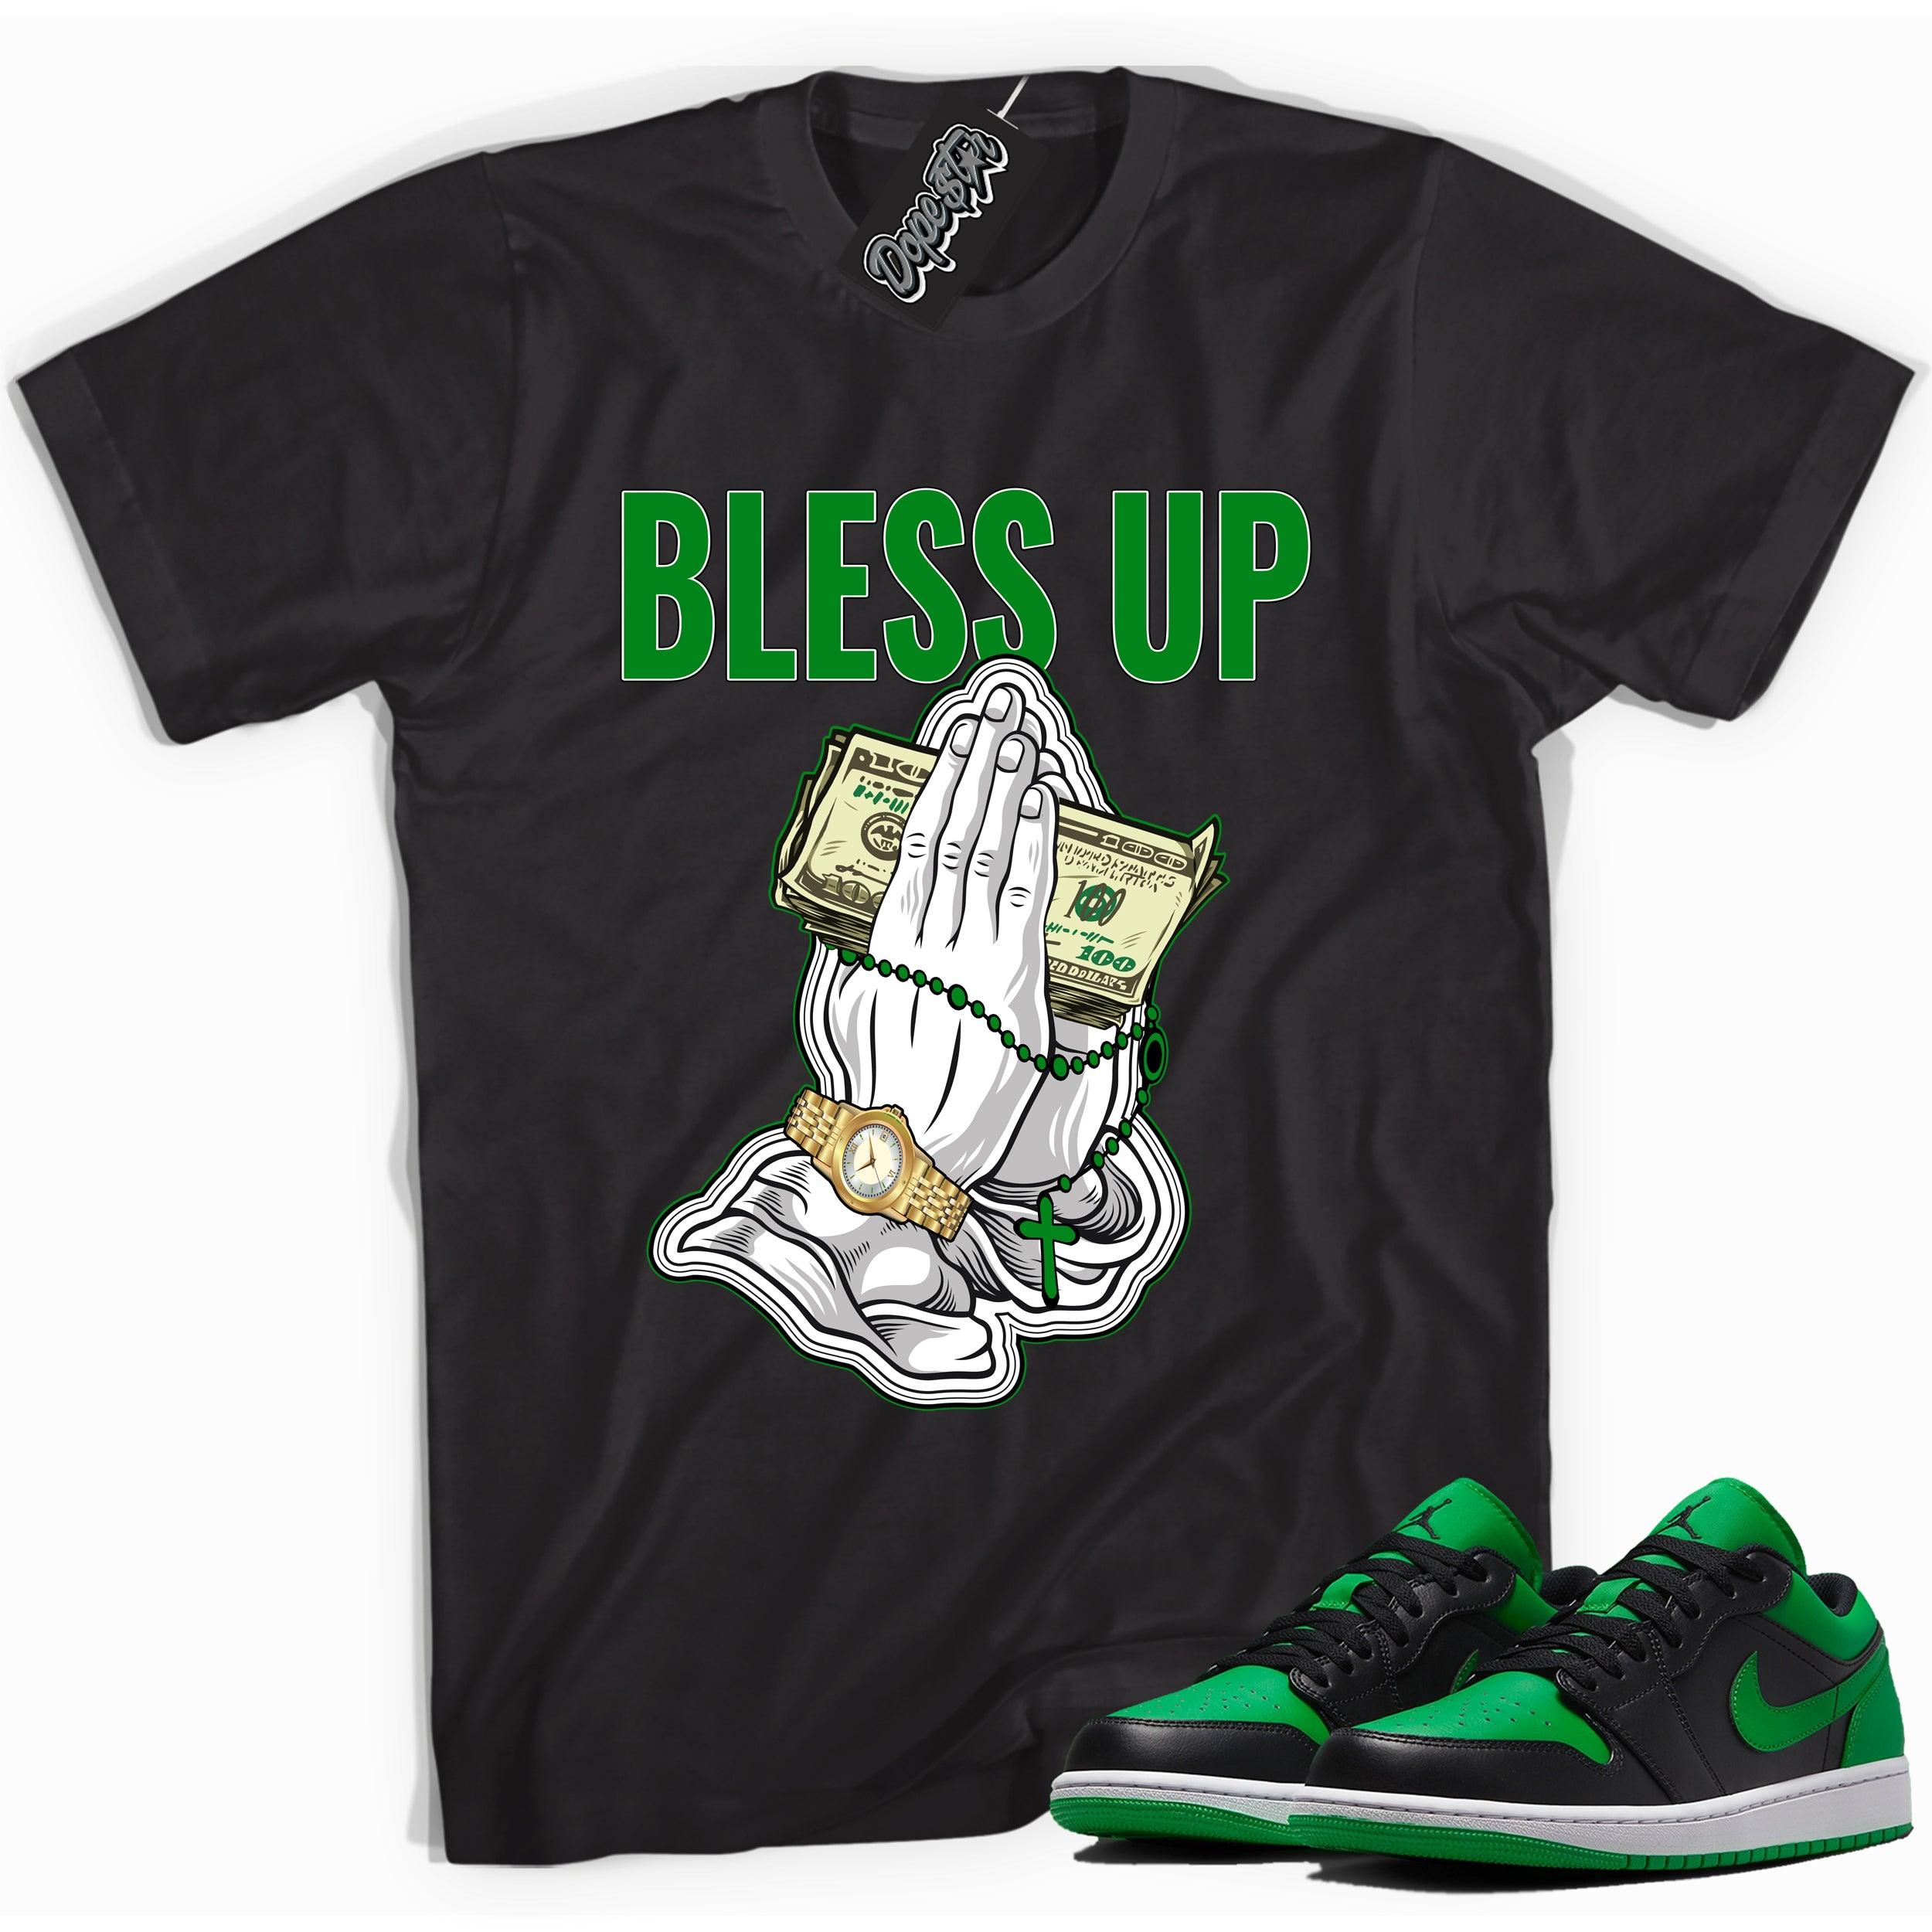 Cool black graphic tee with 'Bless Up' print, that perfectly matches Air Jordan 1 Low Lucky Green sneakers